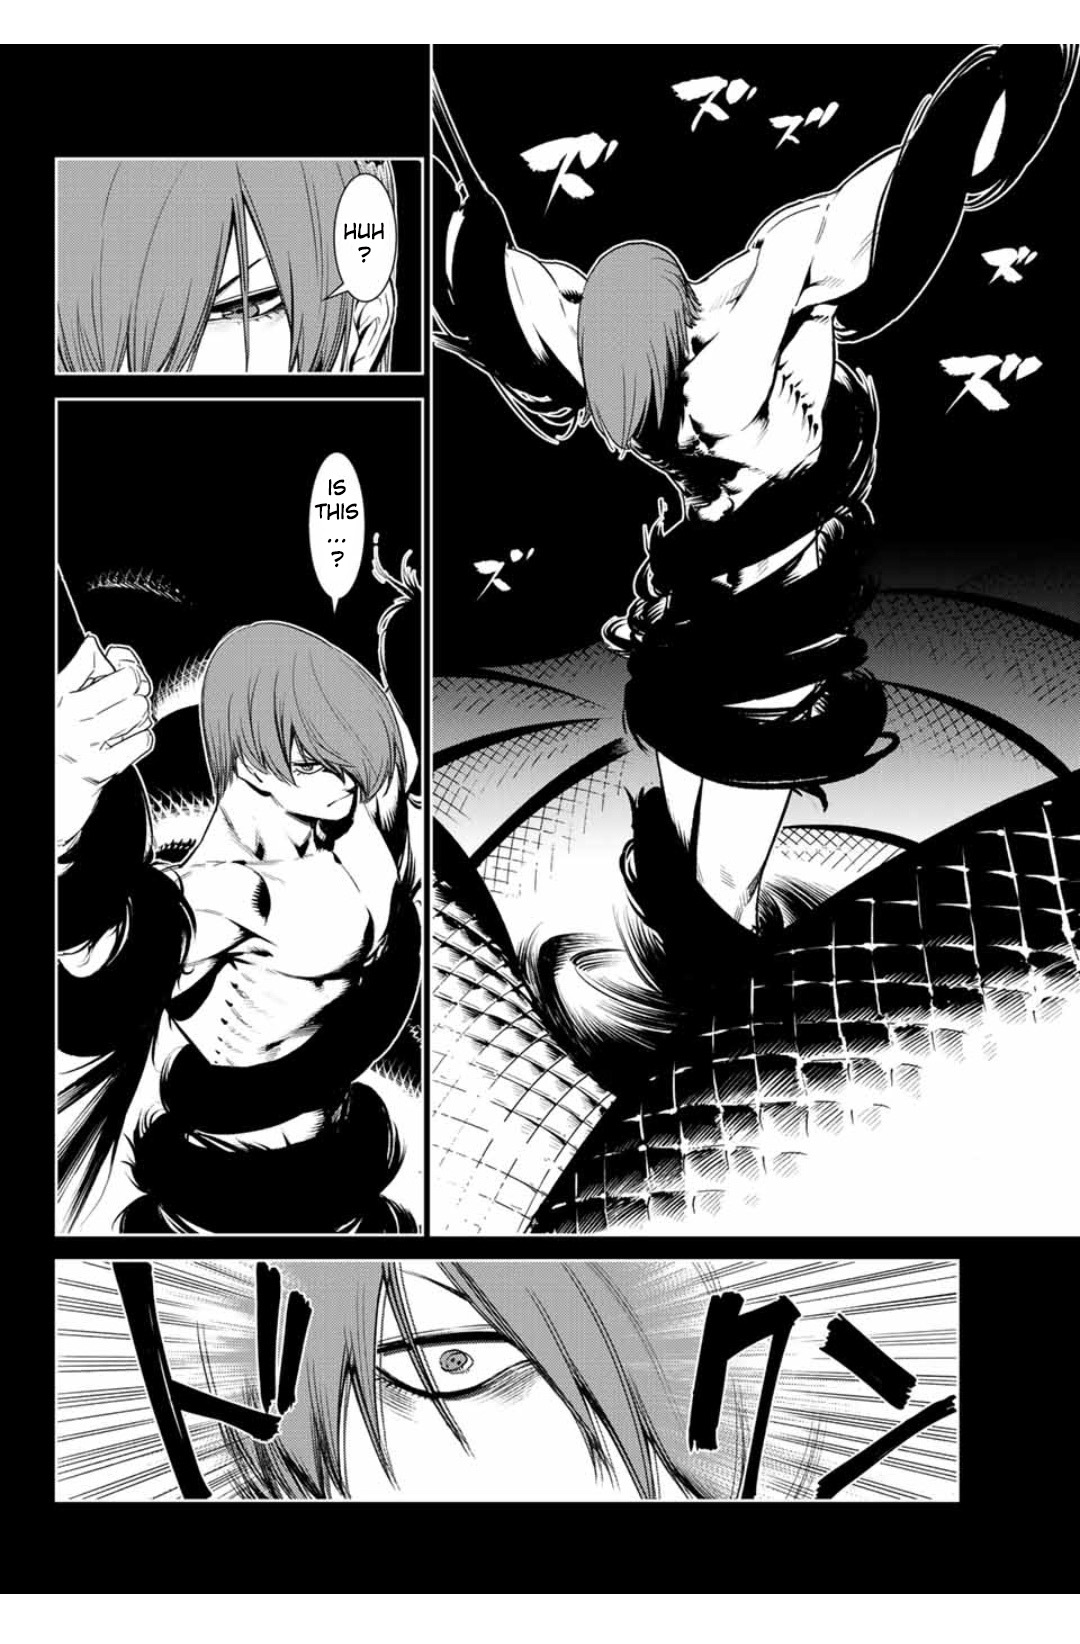 The King of Fighters: A New Beginning Vol. 2 Ch. 7.2 Team Japan vs Team Yagami 5th